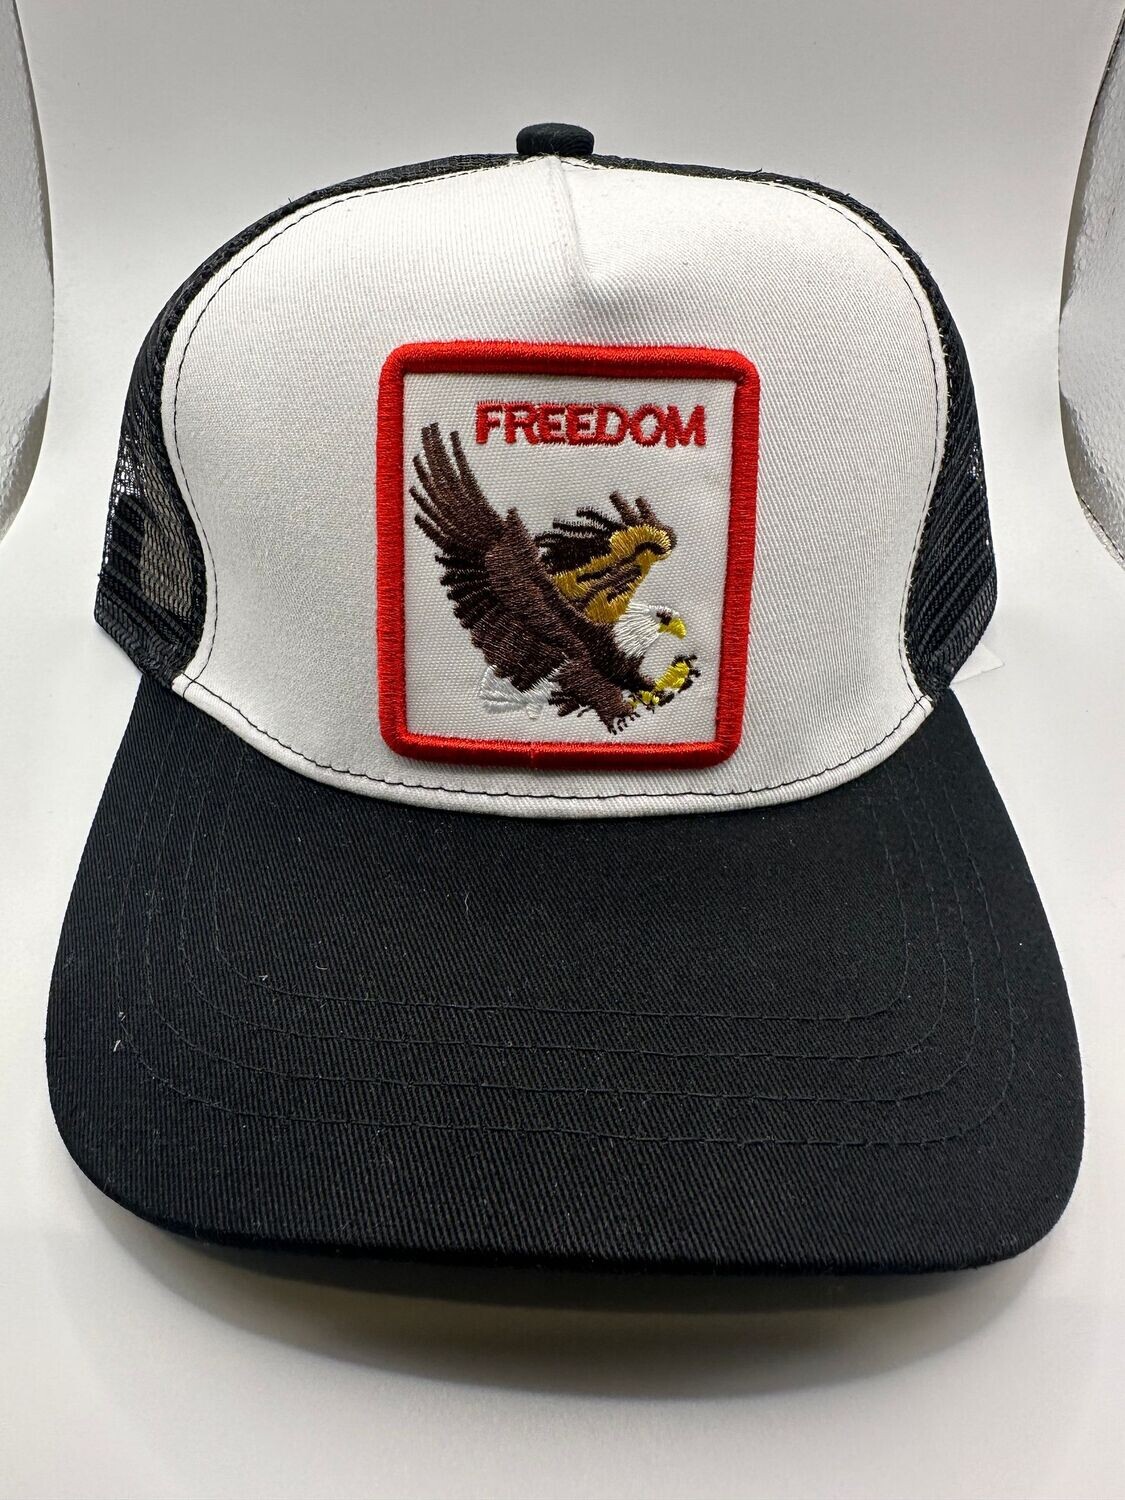 The Freedom Hat